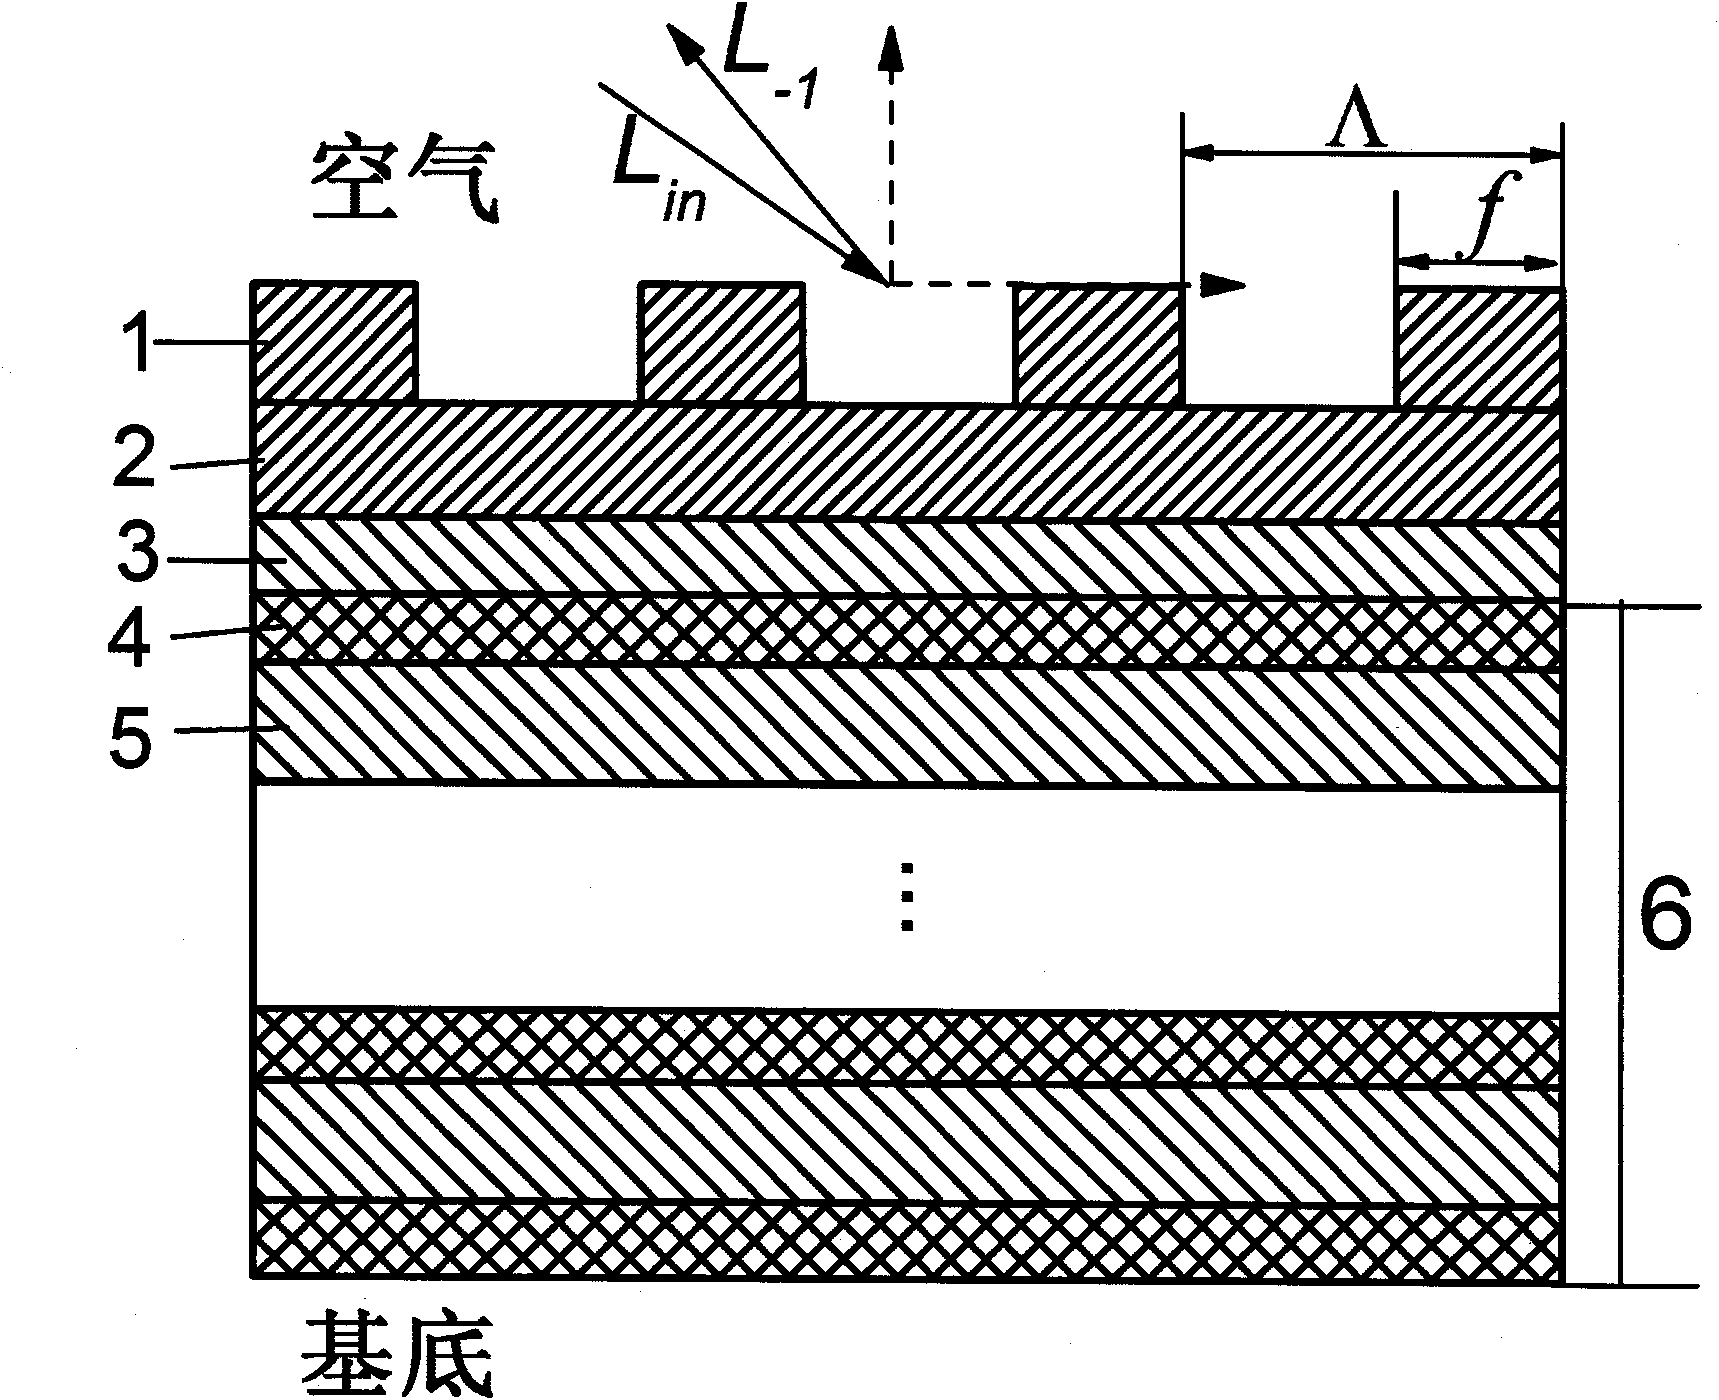 Broadband all-dielectric multilayer-film reflective diffraction grating and design method thereof